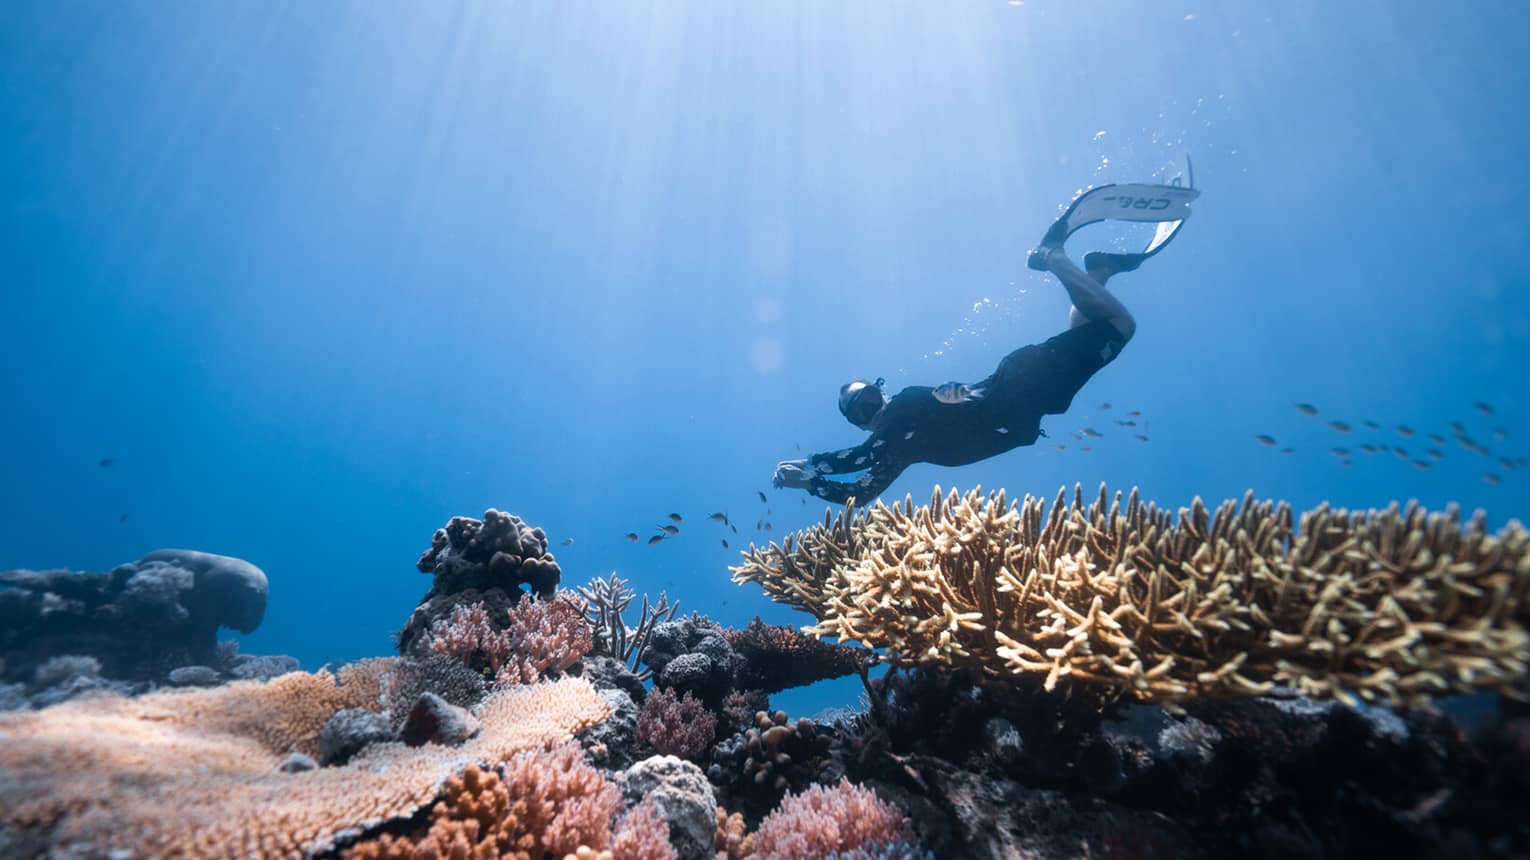 ,A person scuba dives over a colorful coral reef